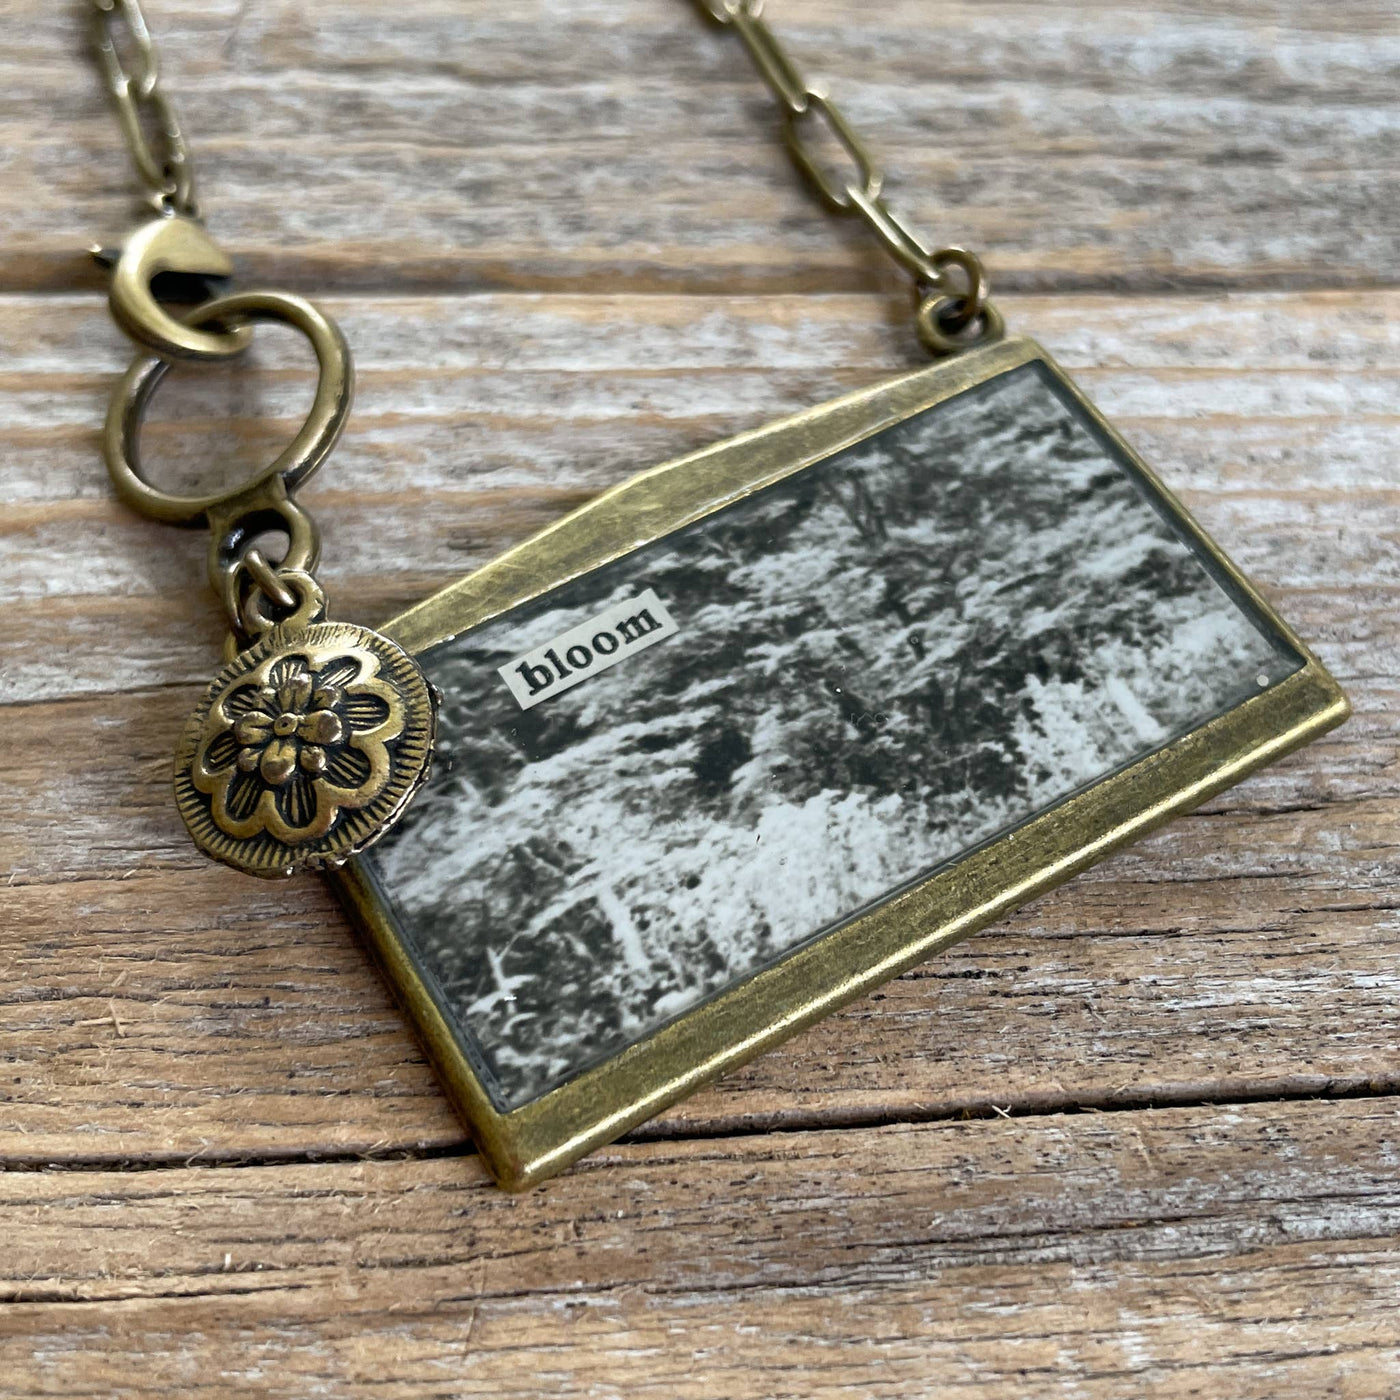 Garden Collection - Vintage Photo Collage Necklace (AB): Grow